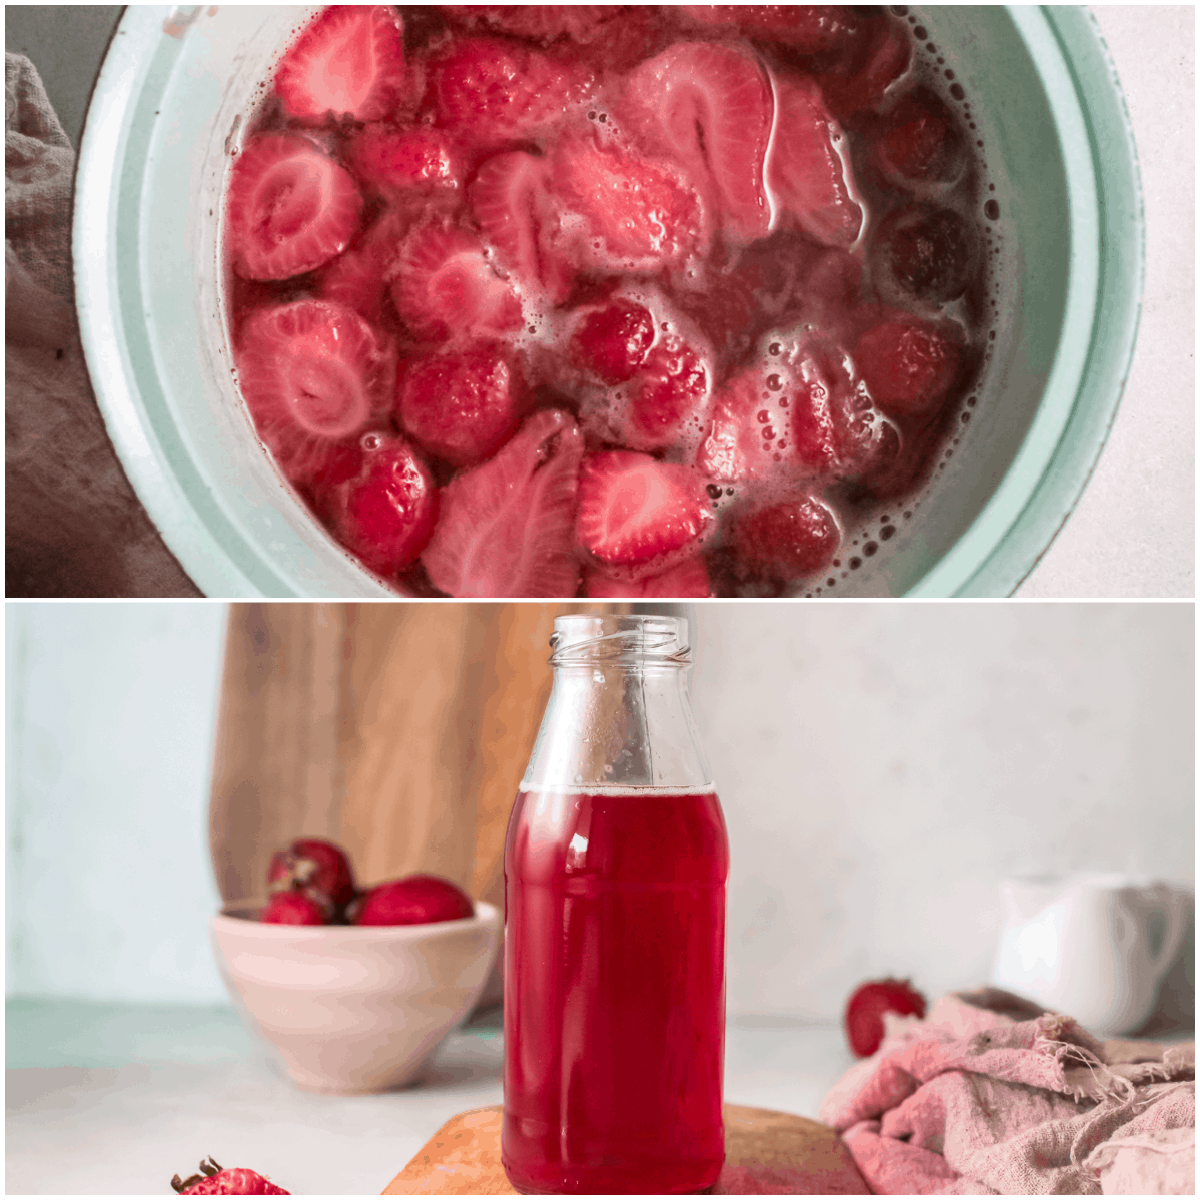 image collage showing the steps for making strawberry syrup that is used in this sweet tea recipe